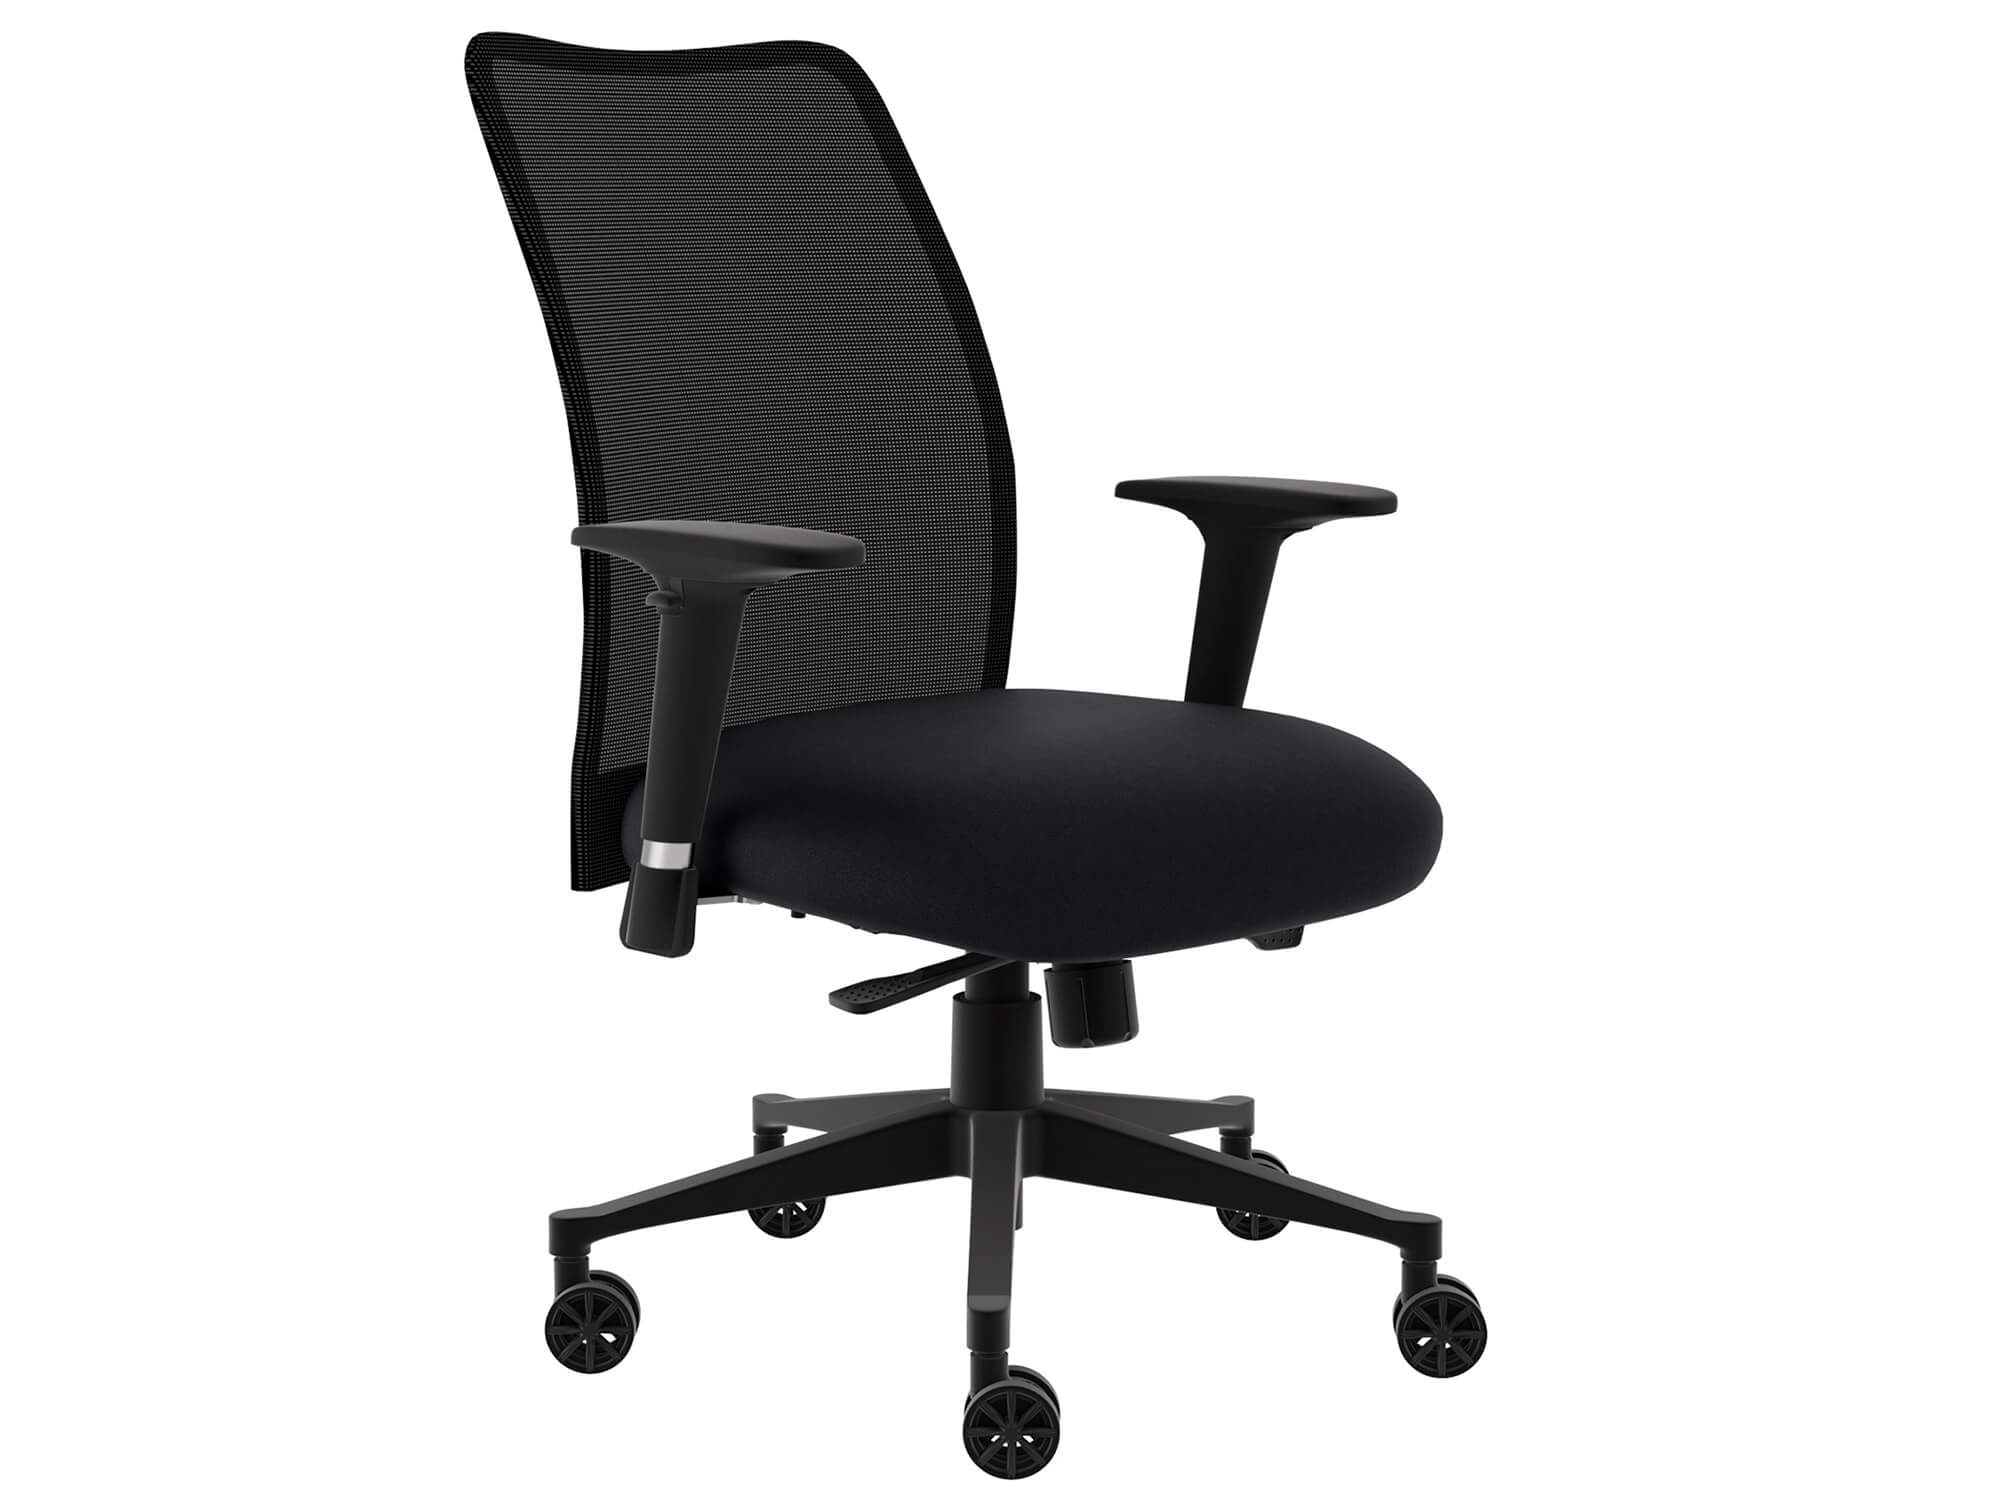 chairs-for-office-business-chairs.jpg